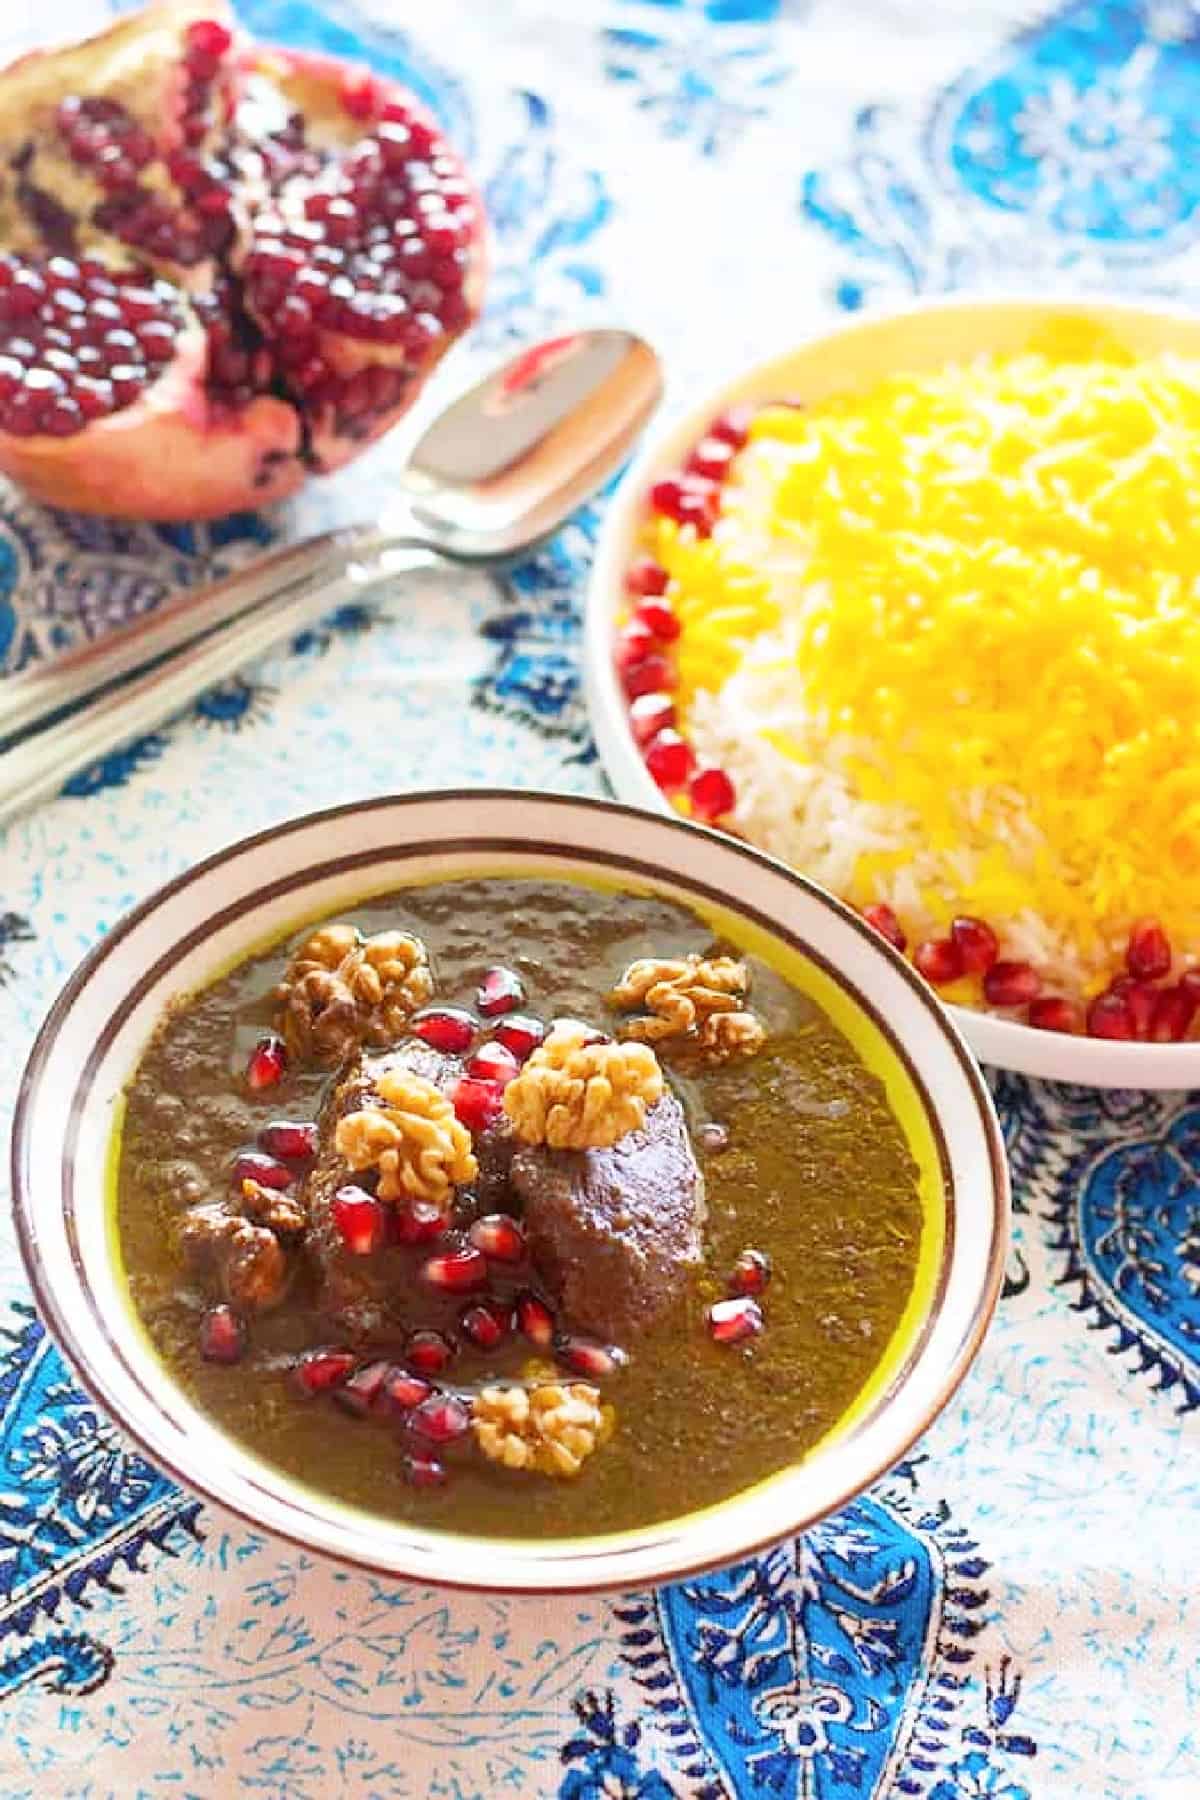 Dive into Persian deliciousness! Fesenjan stew is a wonderful Persian concoction made with chicken, pomegranates and walnuts served with rice for a perfect meal with bold flavors! 
